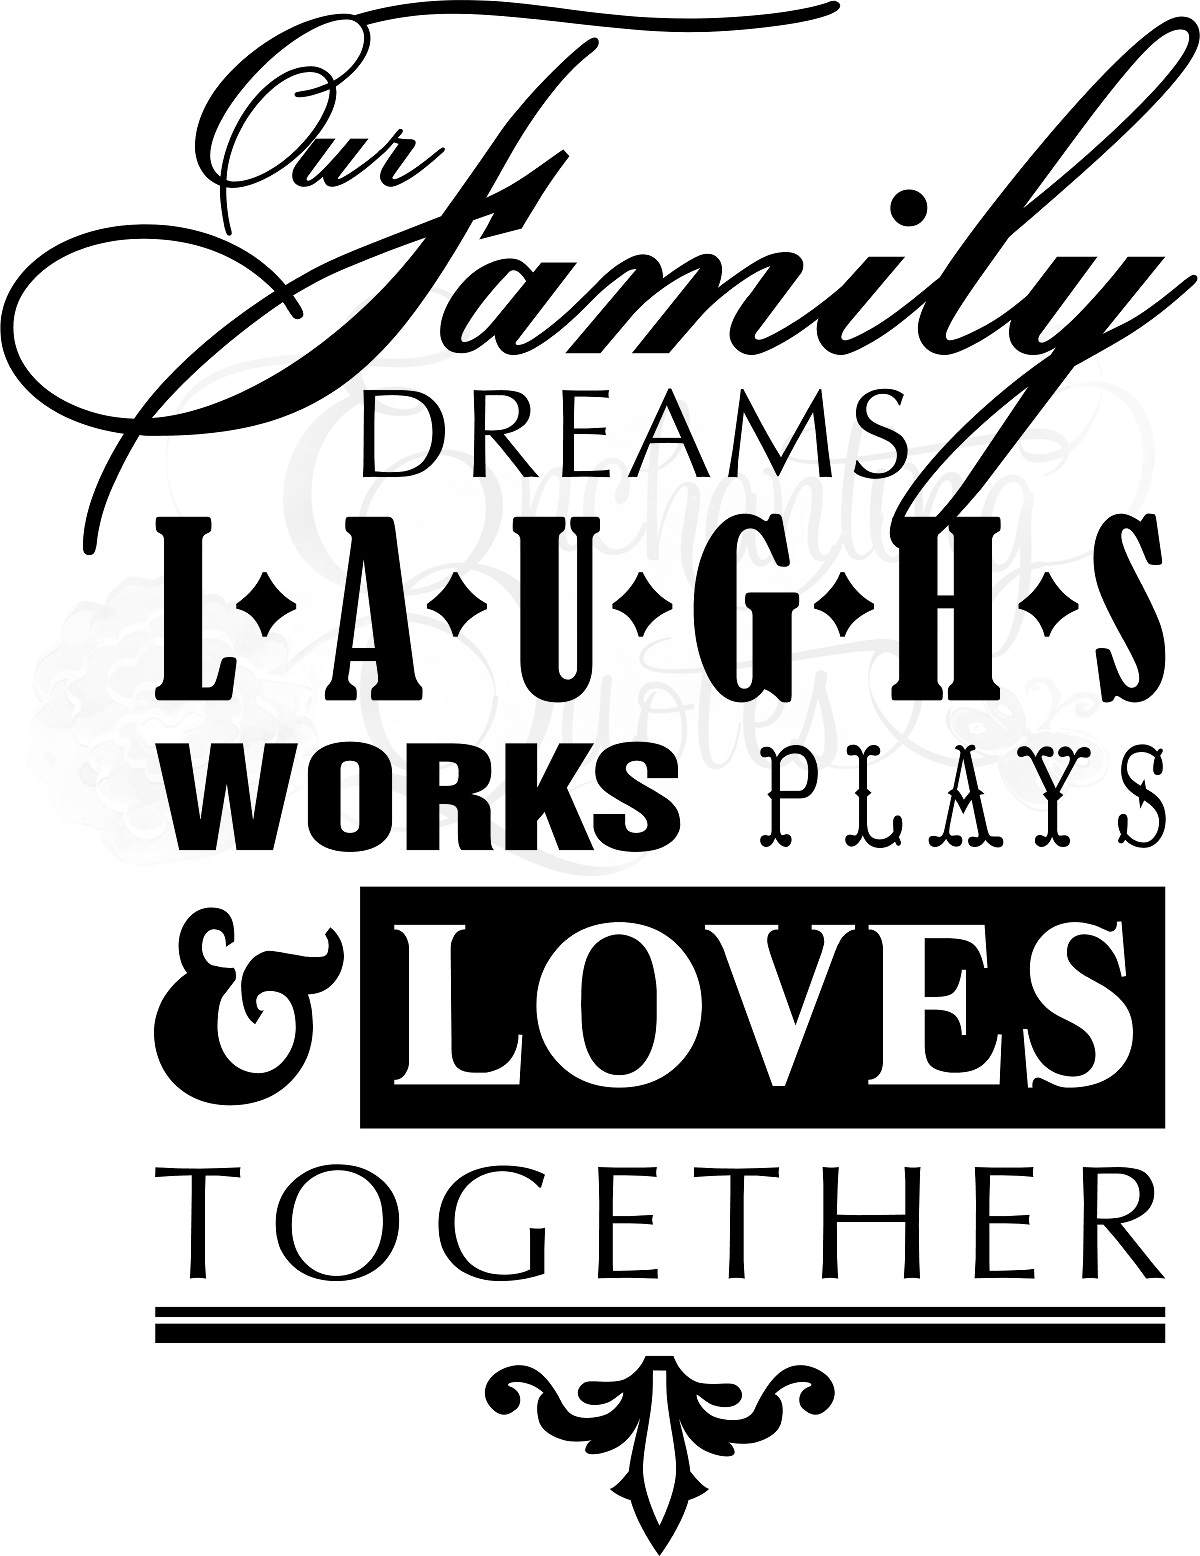 Our family dreams, laughs, works, plays, and loves together.